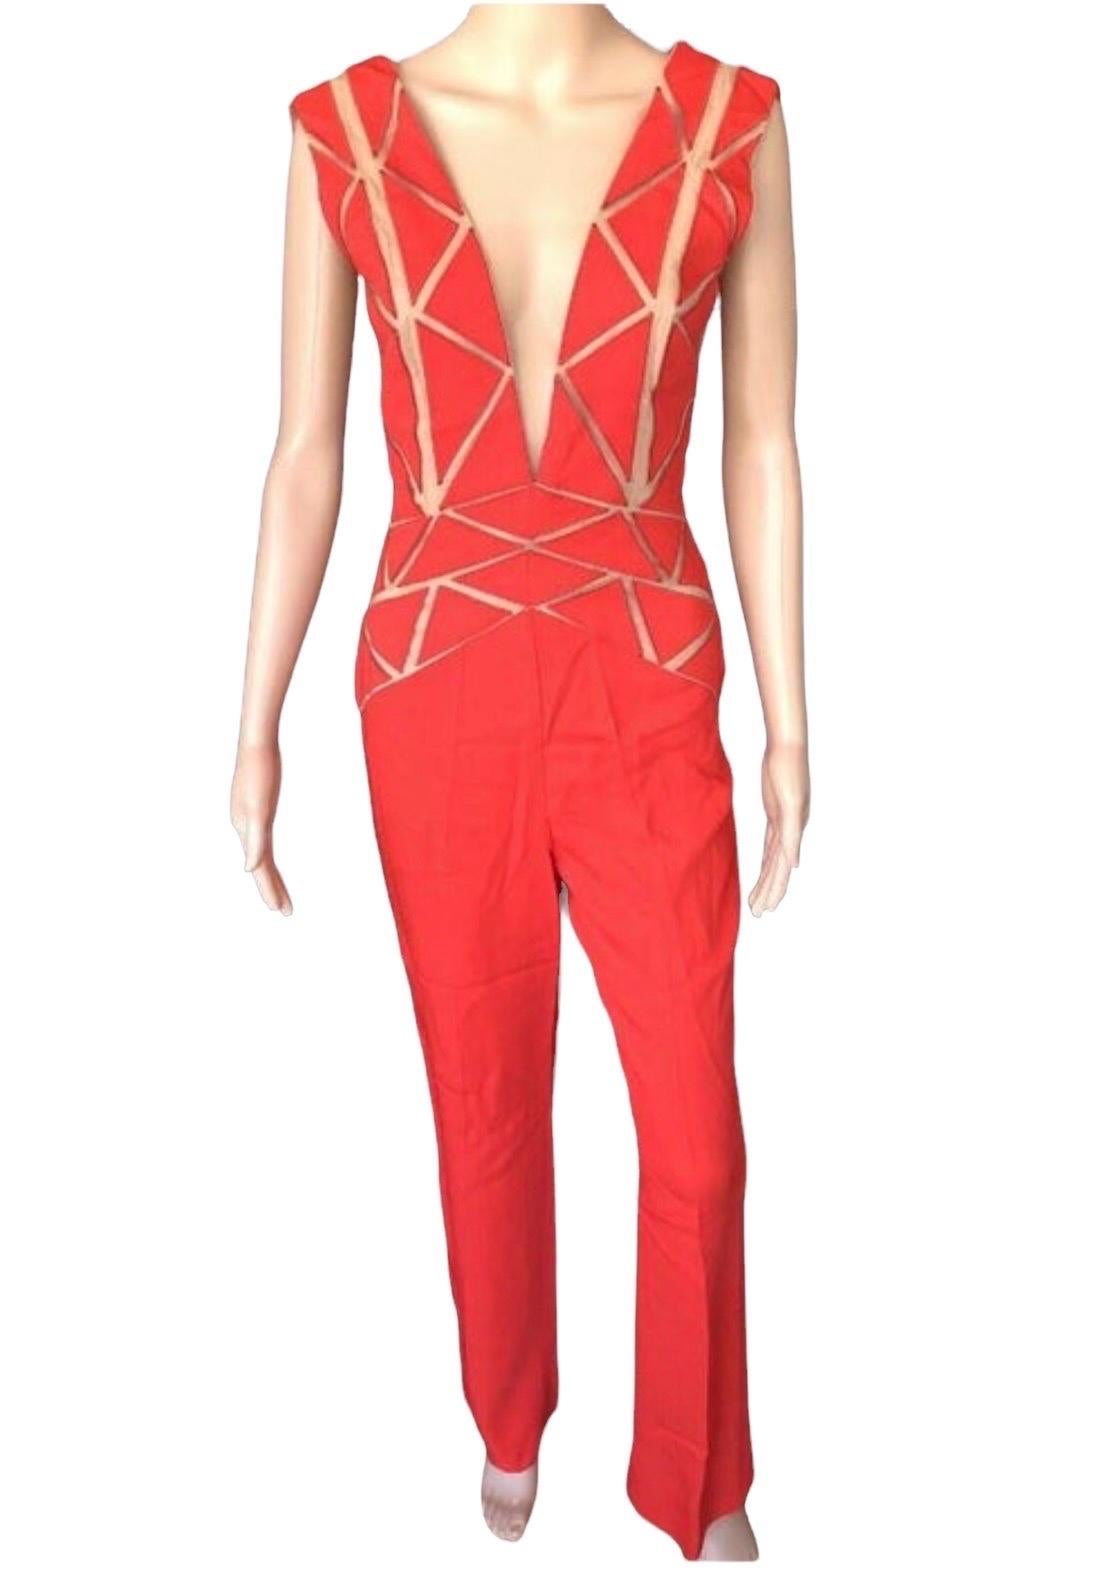 Zuhair Murad Resort 2015 Runway Plunged Sheer Tulle Cutout Red Romper Jumpsuit For Sale 1